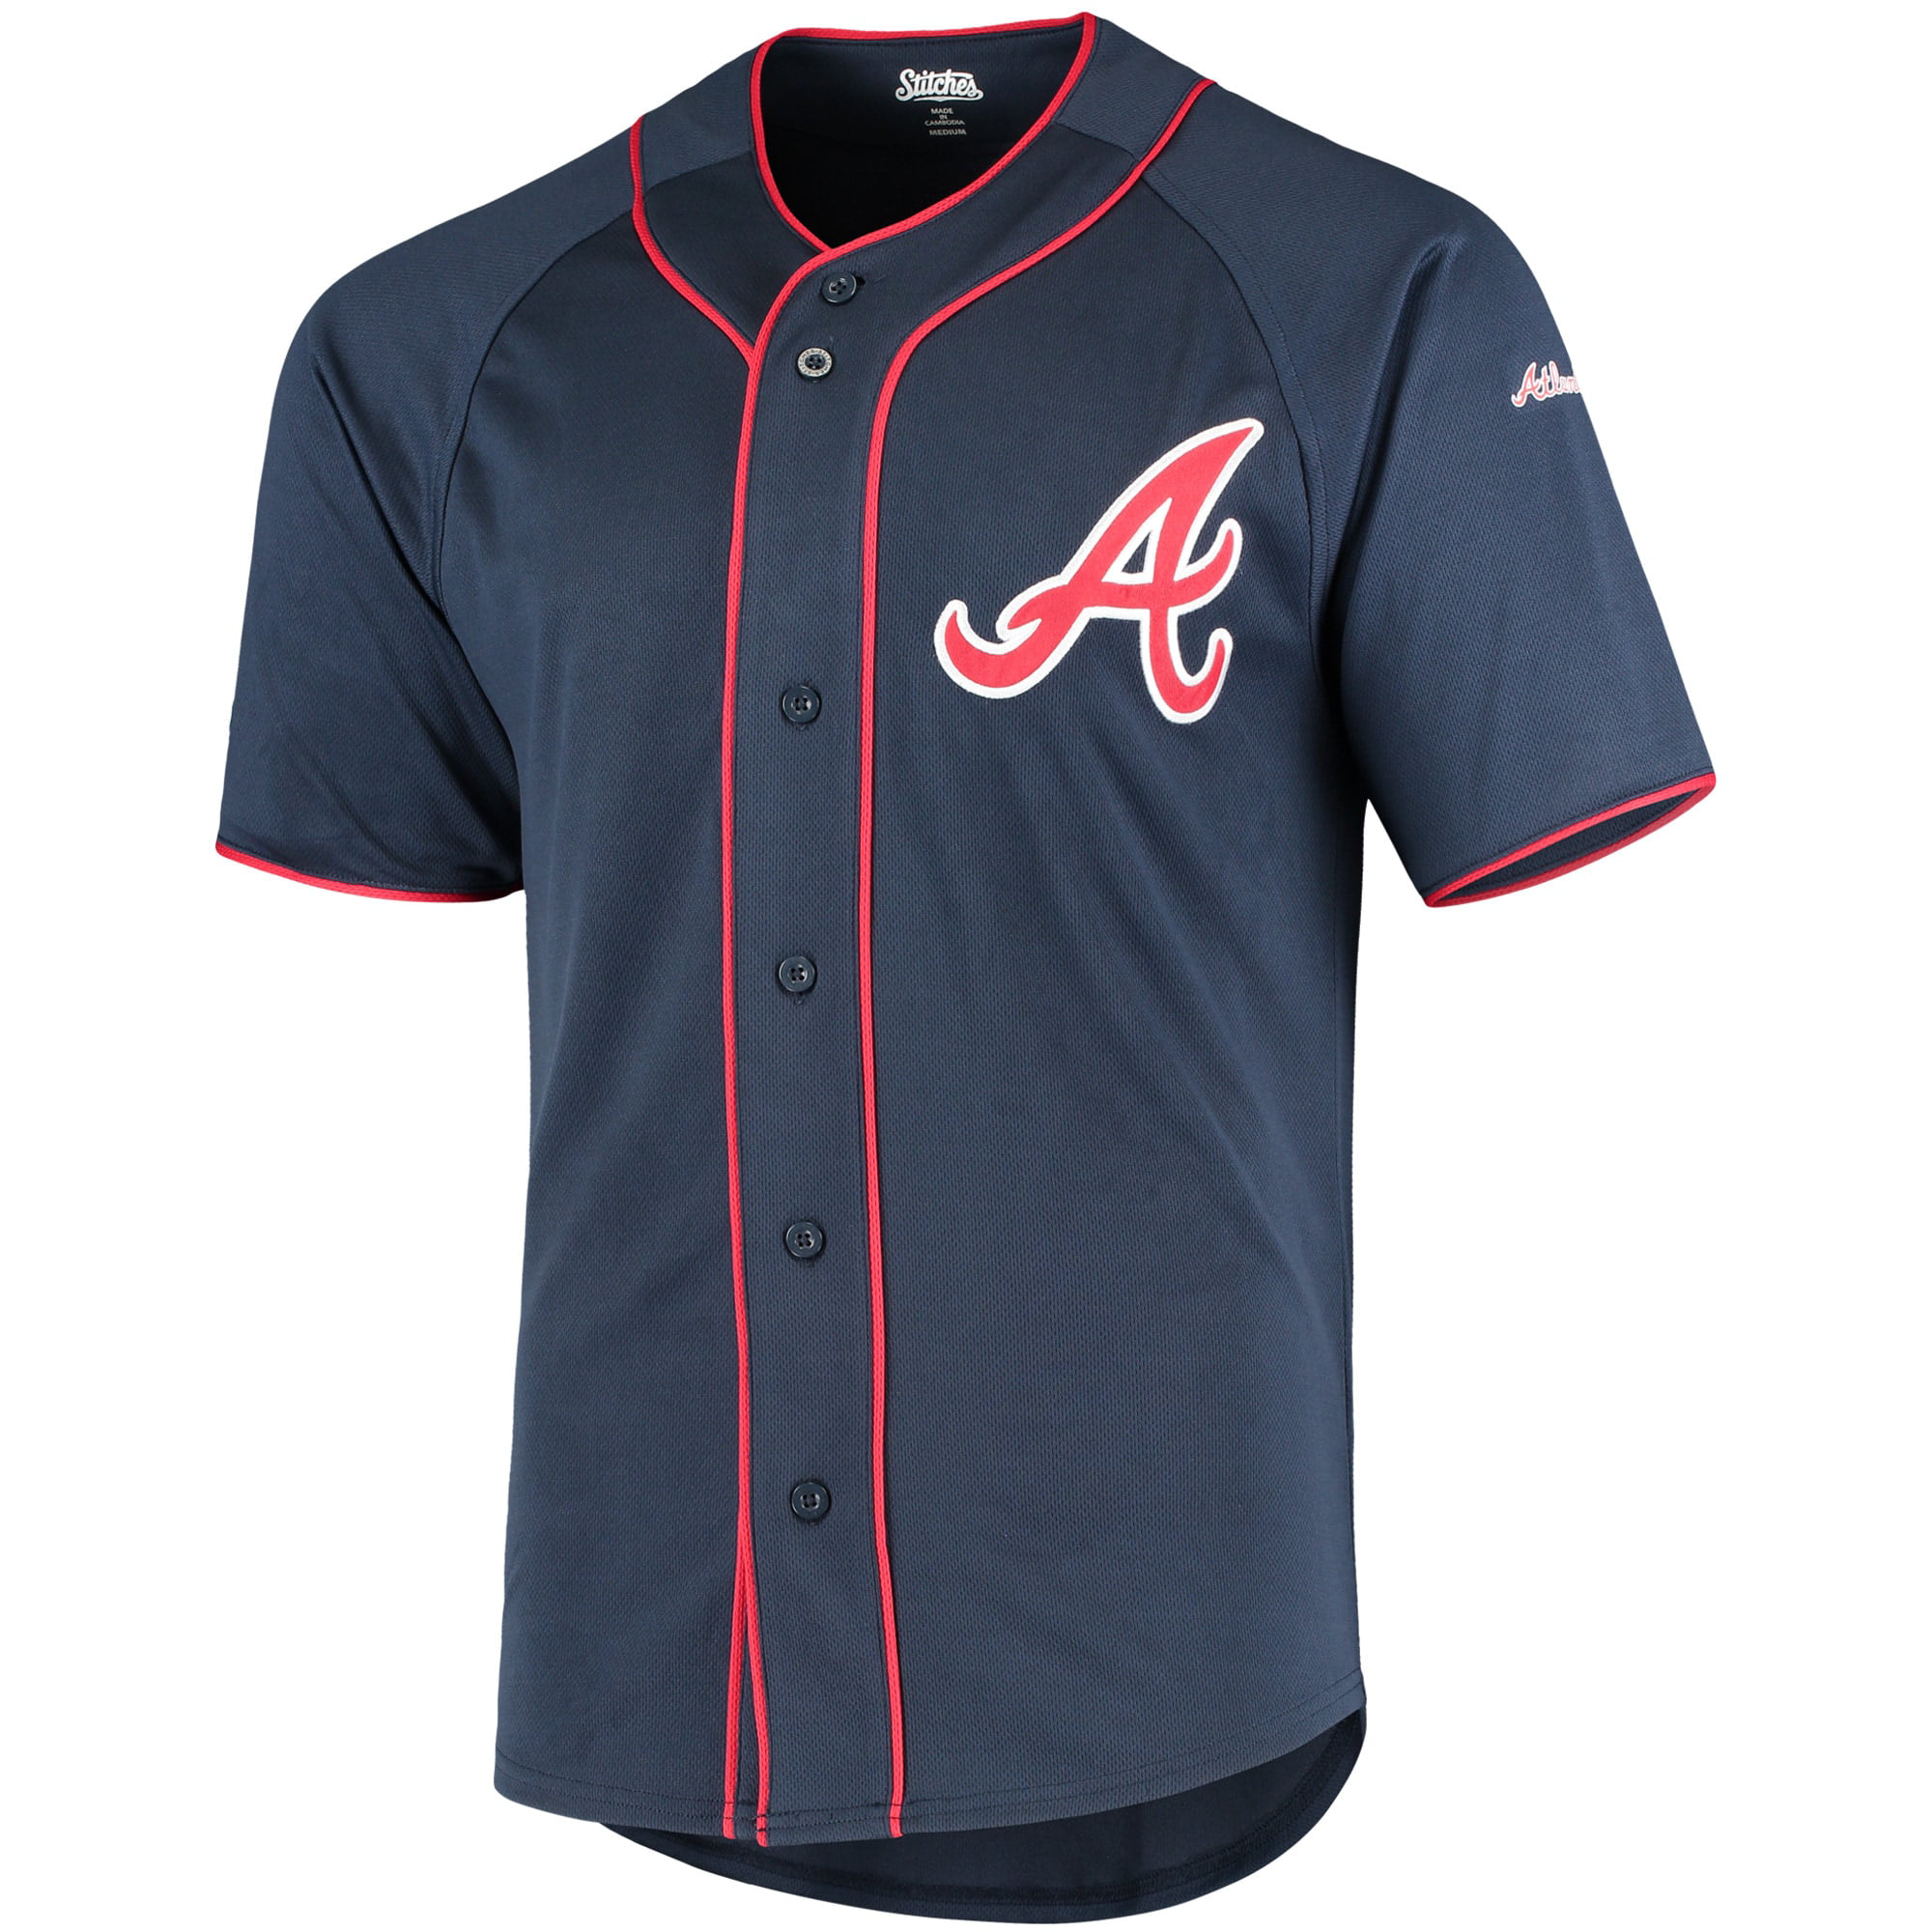 Chipper Jones Atlanta Braves Autographed Grey Mitchell & Ness Cooperstown  Collection Authentic Jersey with HOF 18 